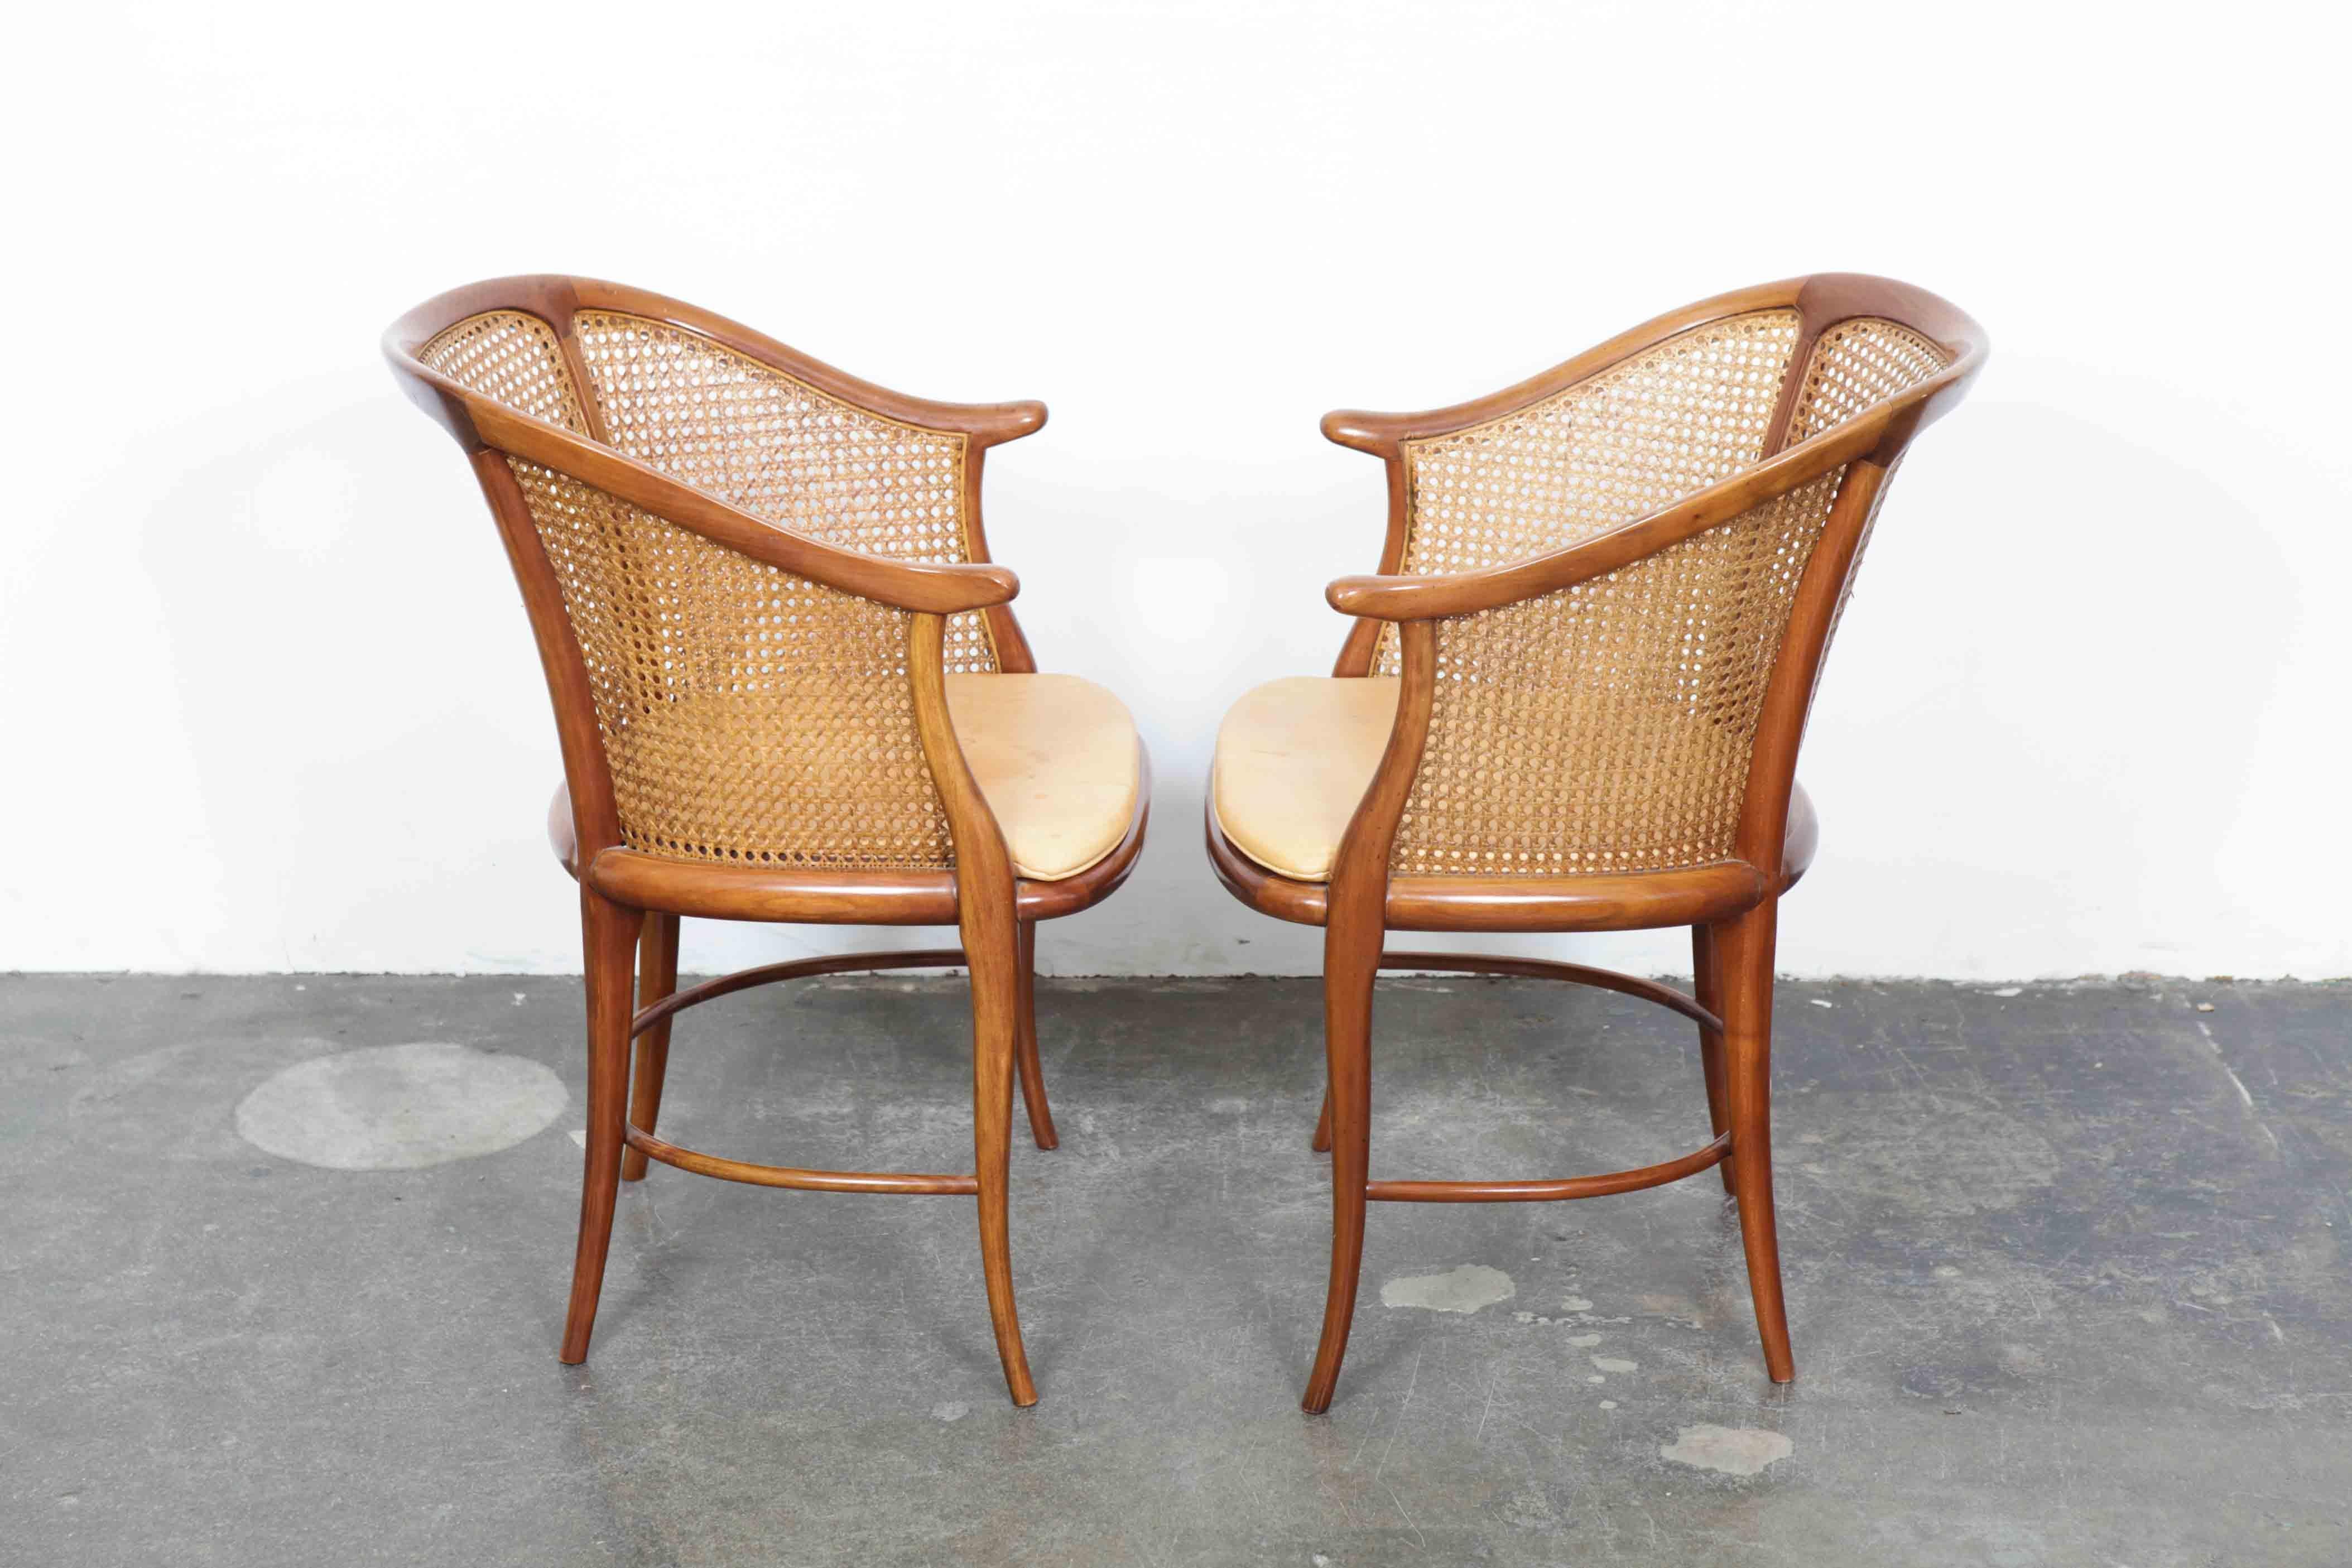 Pair of Cane and Leather Italian Chairs with Cherrywood Frames (Moderne der Mitte des Jahrhunderts)